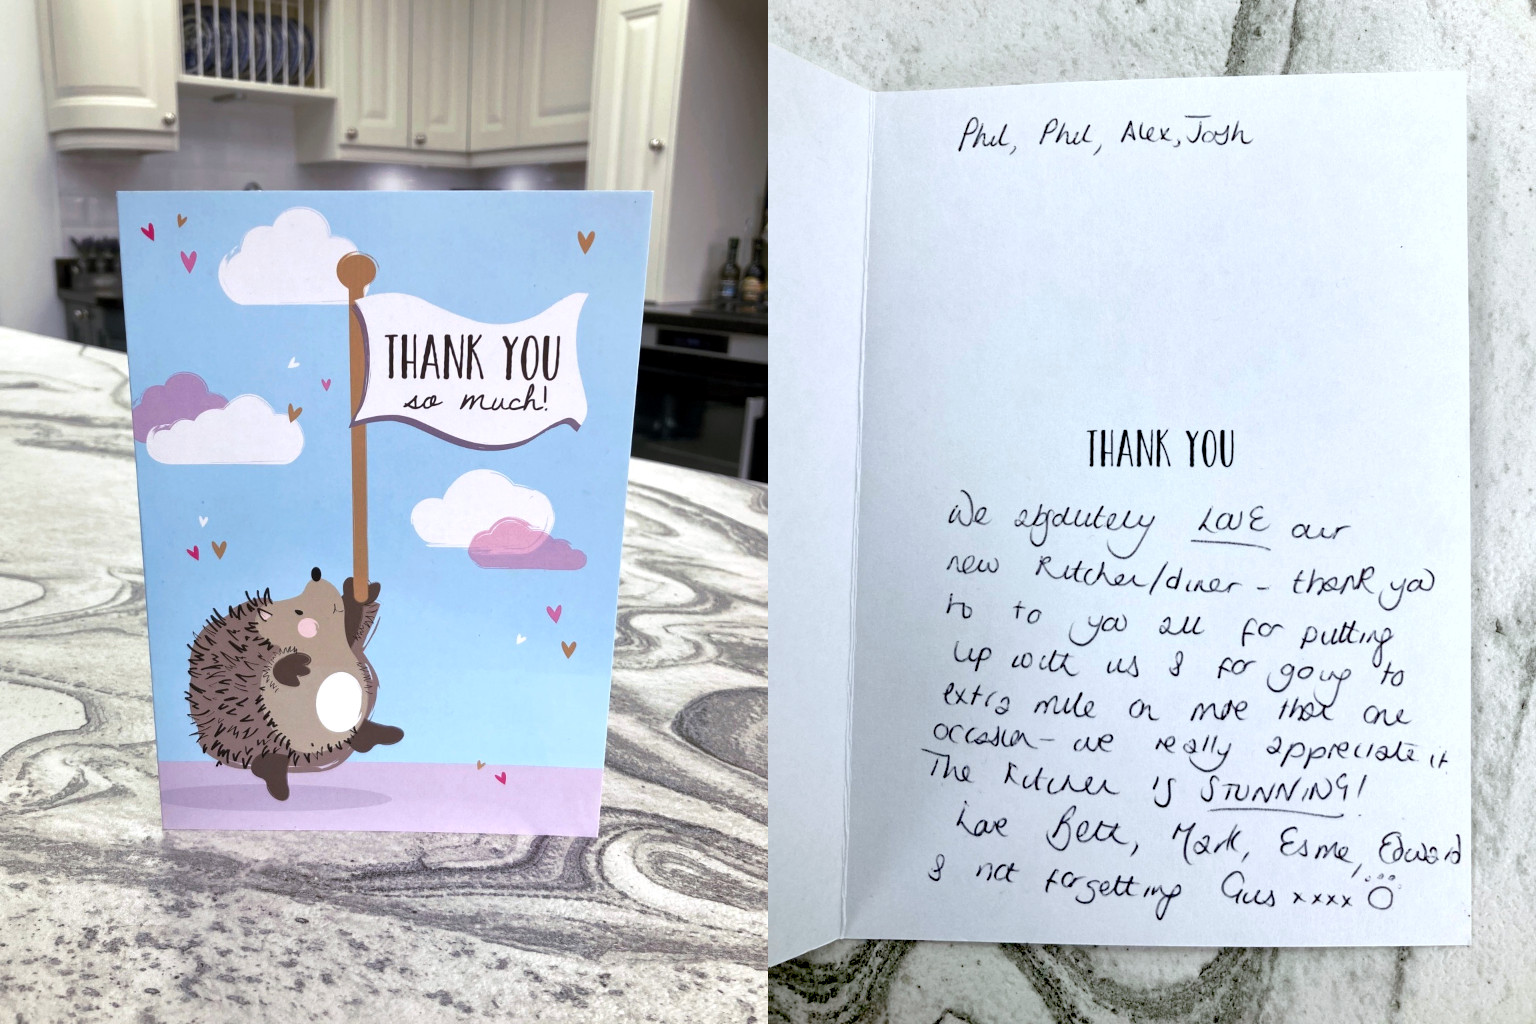 Photograph of a 'thank you' card.